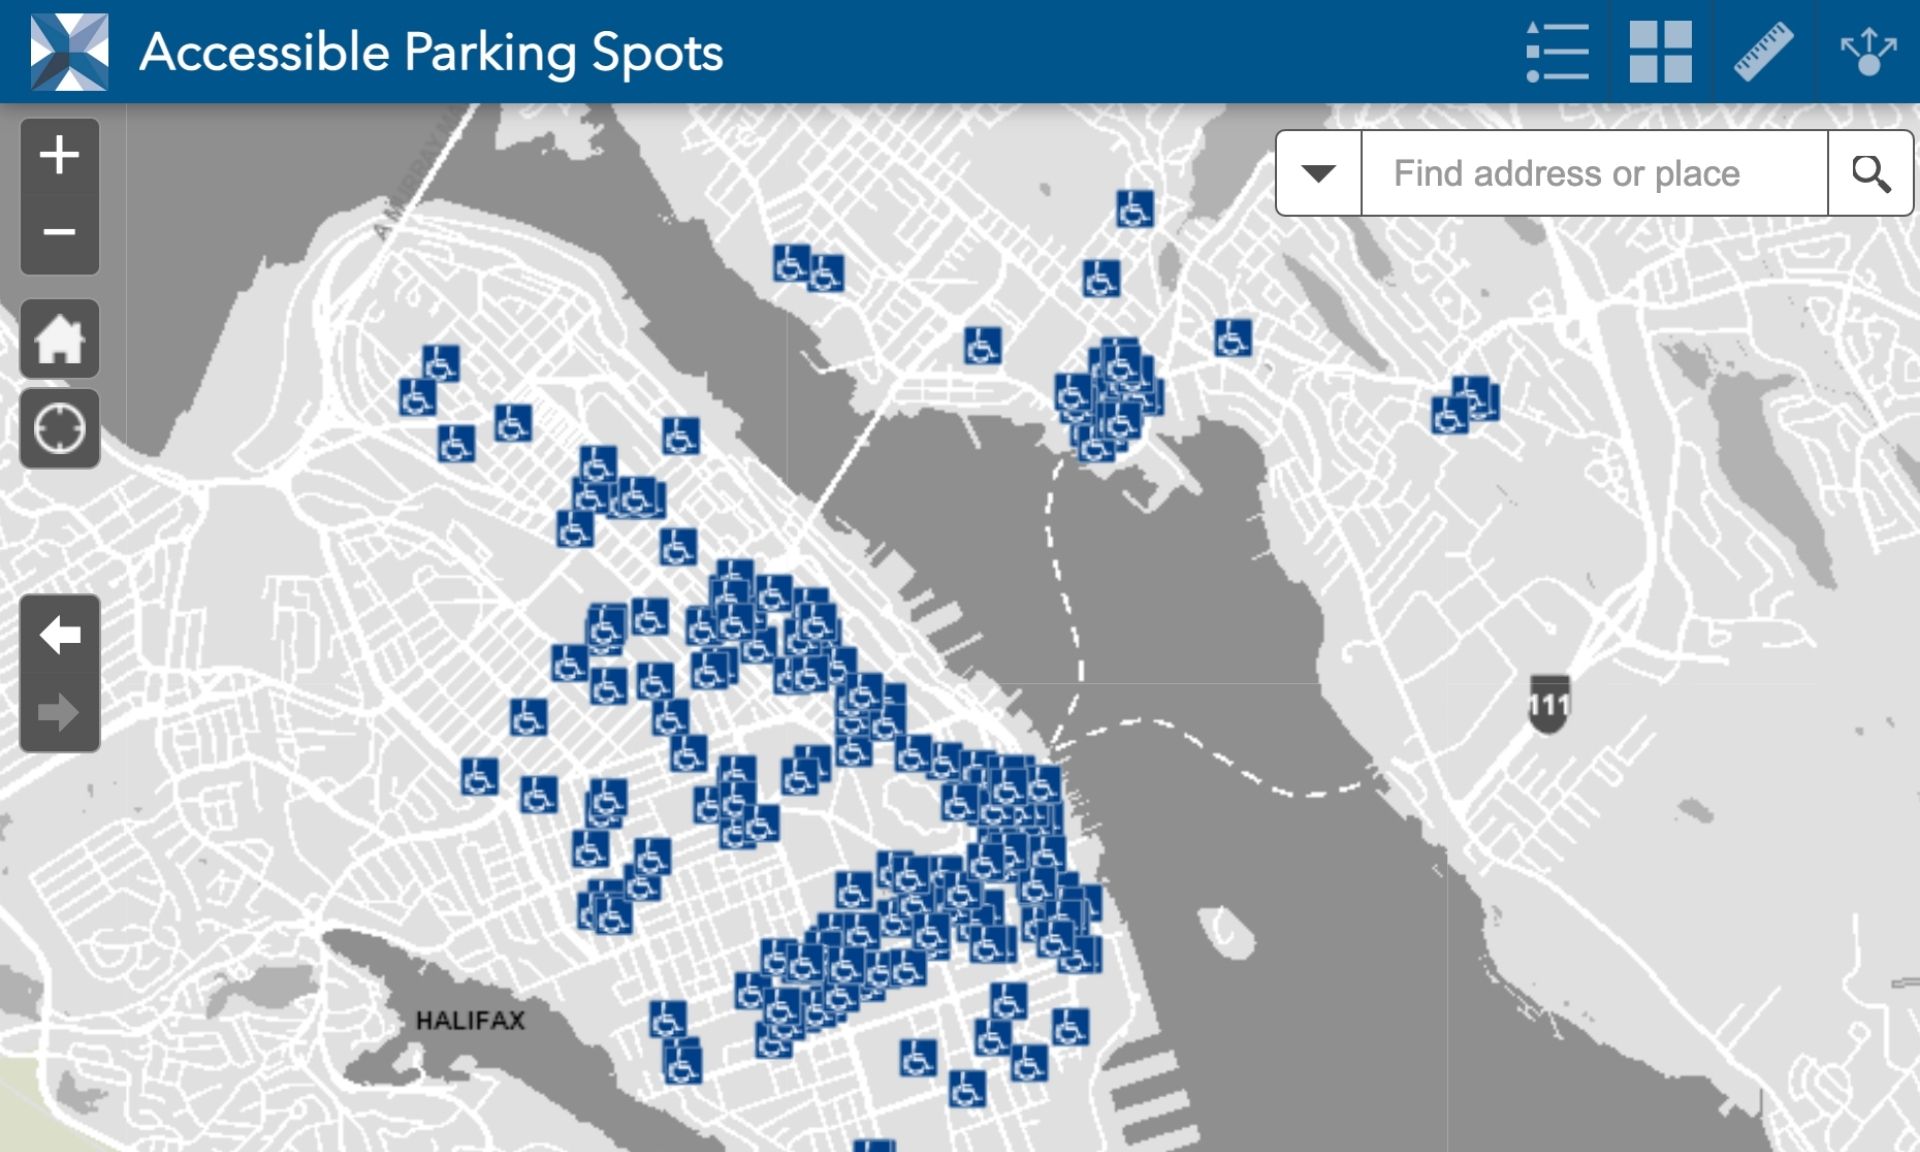 a map showing accessible parking spots in Halifax